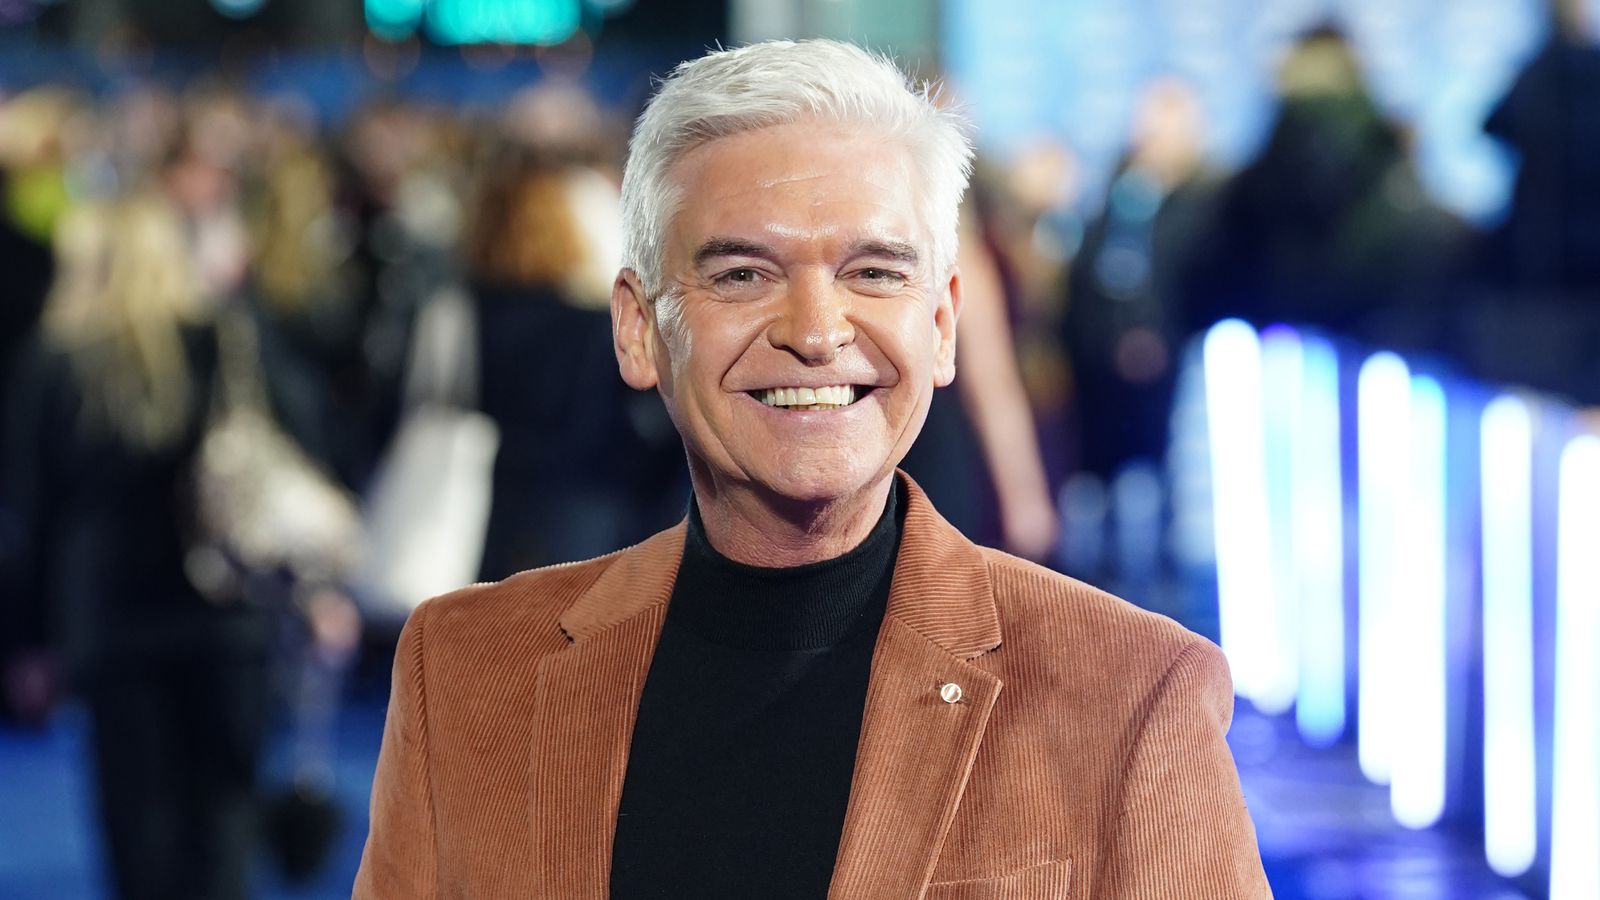 This Morning presenters announced after Phillip Schofield exit | Ents & Arts News